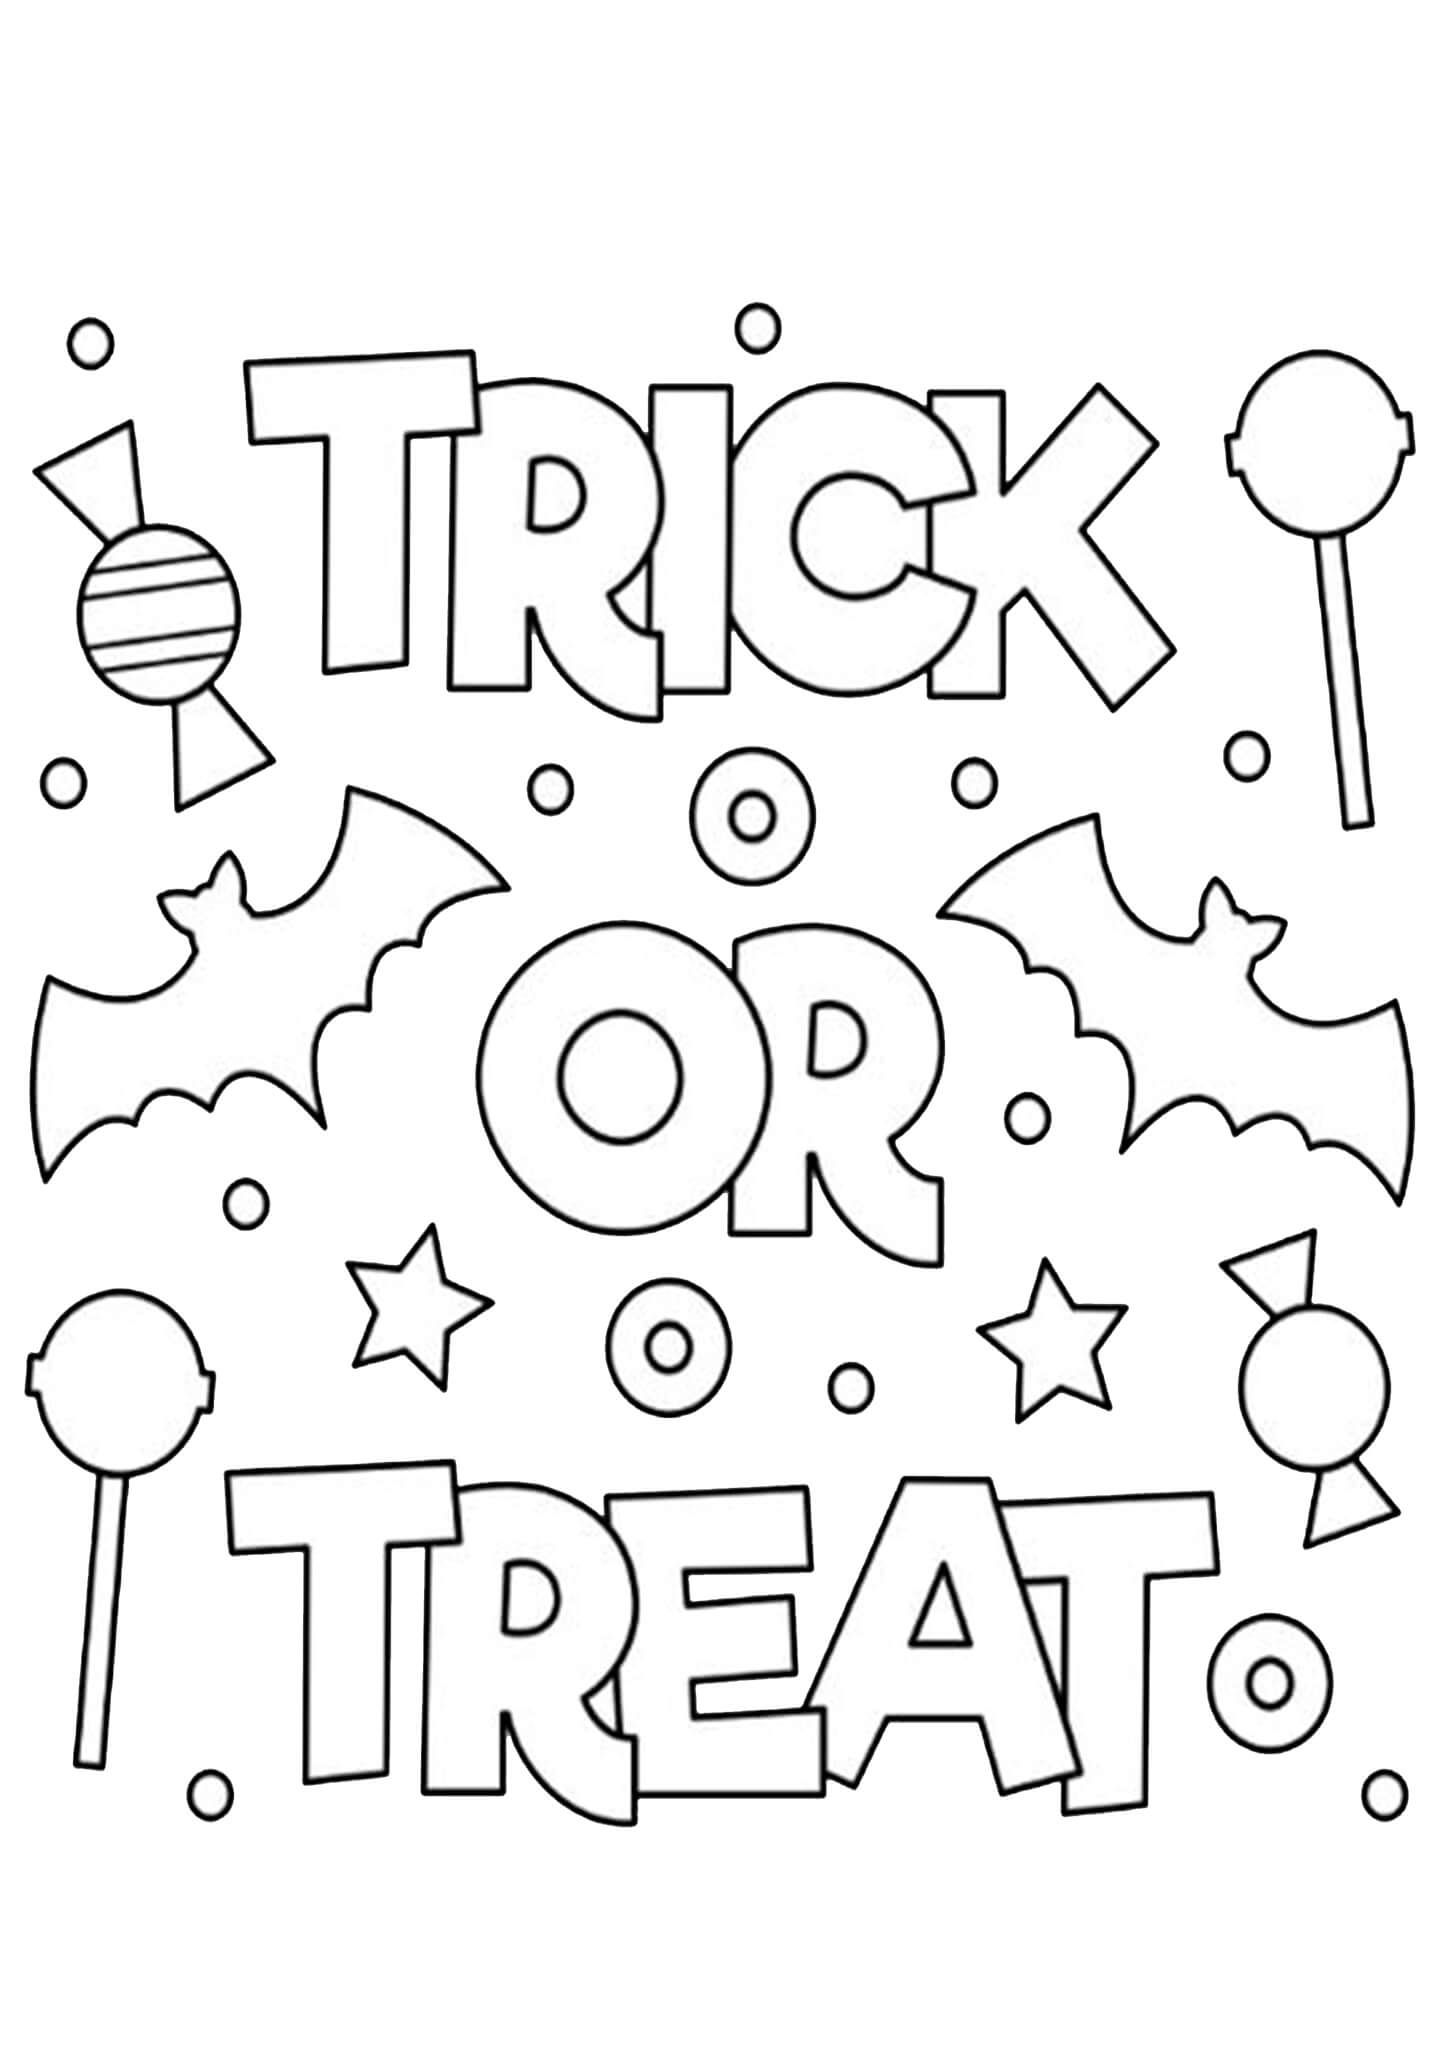 Free easy to print halloween coloring pages halloween coloring sheets halloween coloring pages printable halloween coloring pages